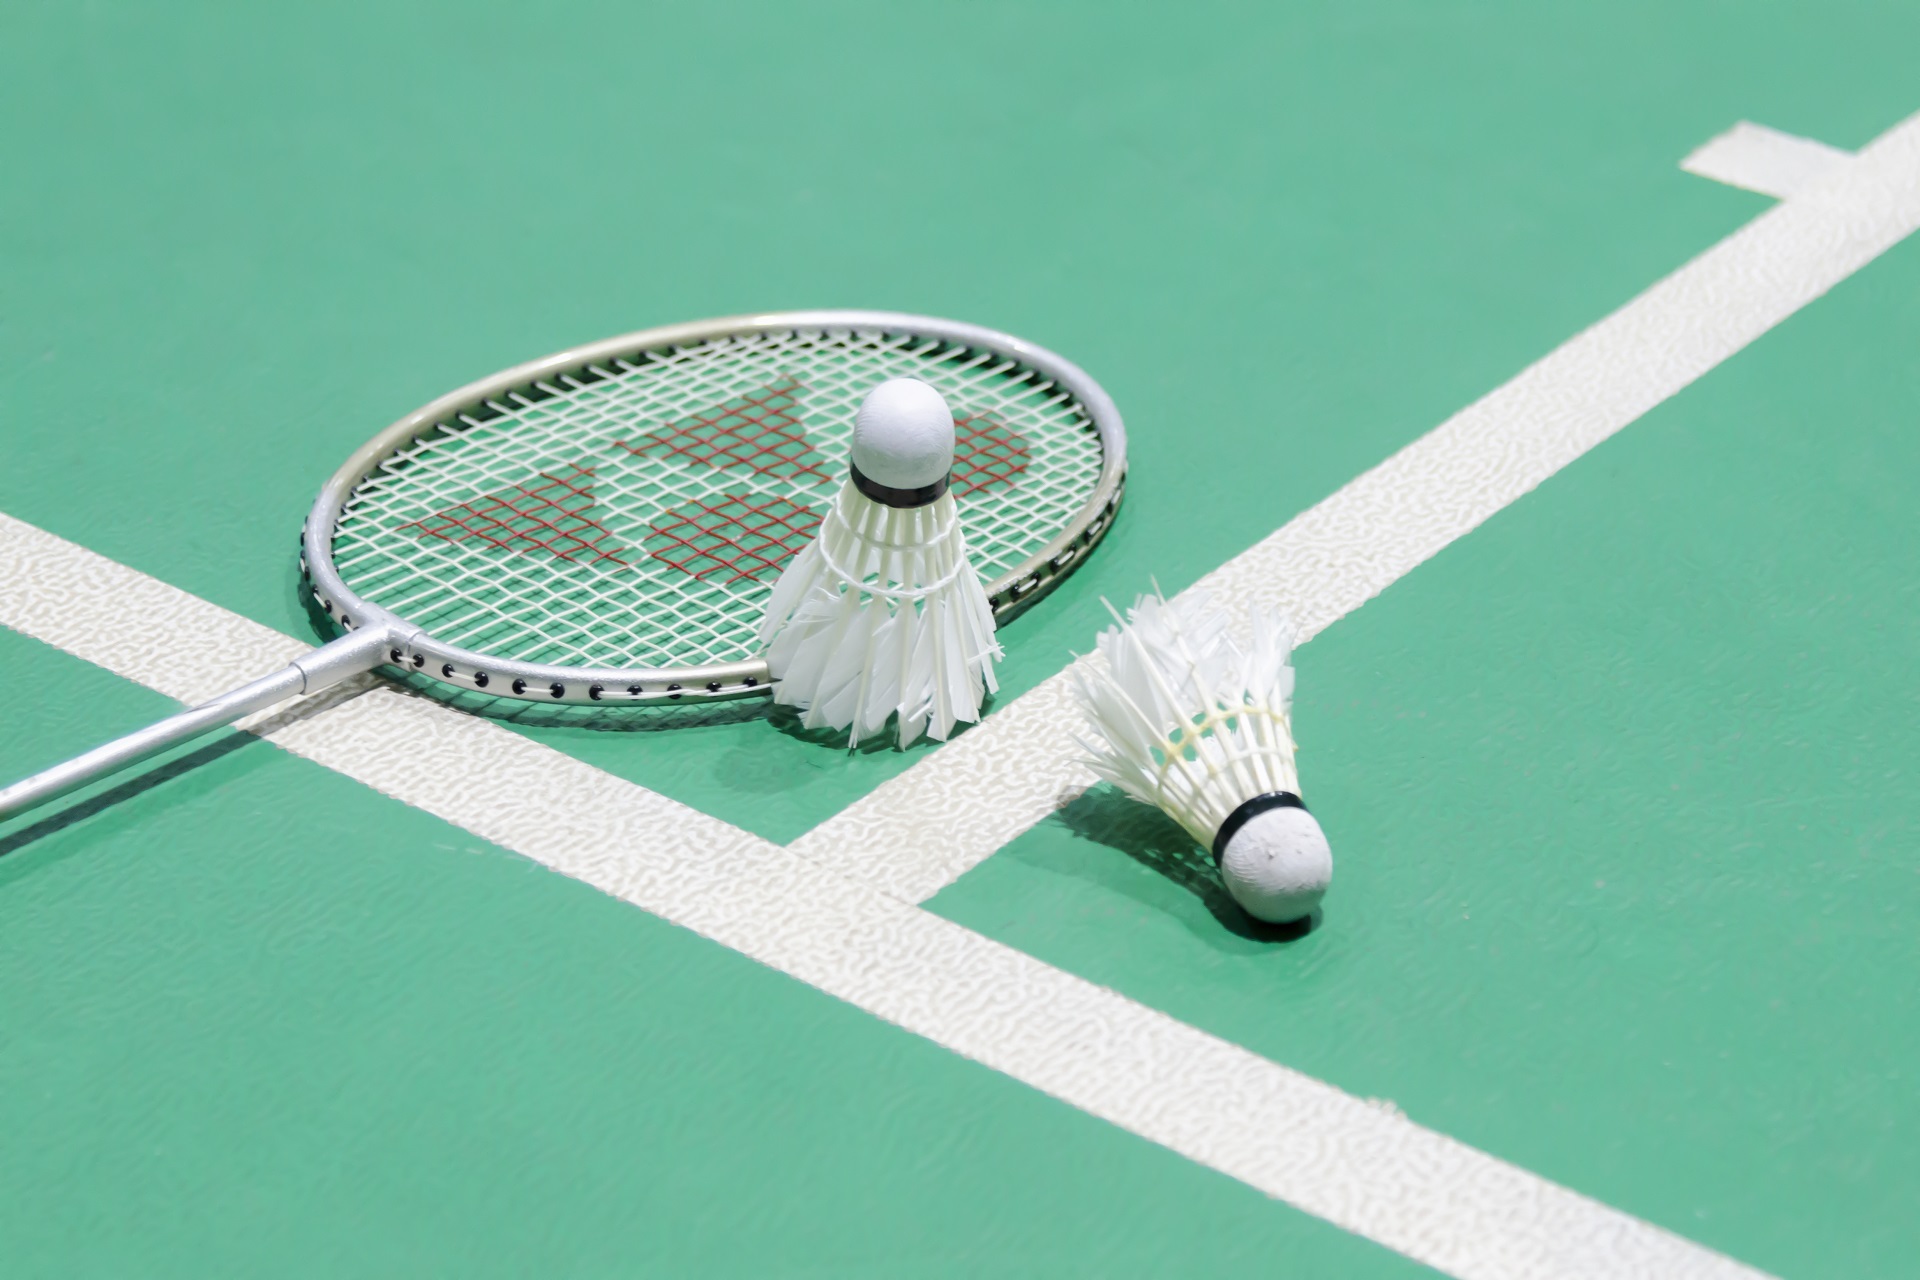 White,Badminton,Shuttlecock,On,A,Green,Floor,With,Blurred,Players